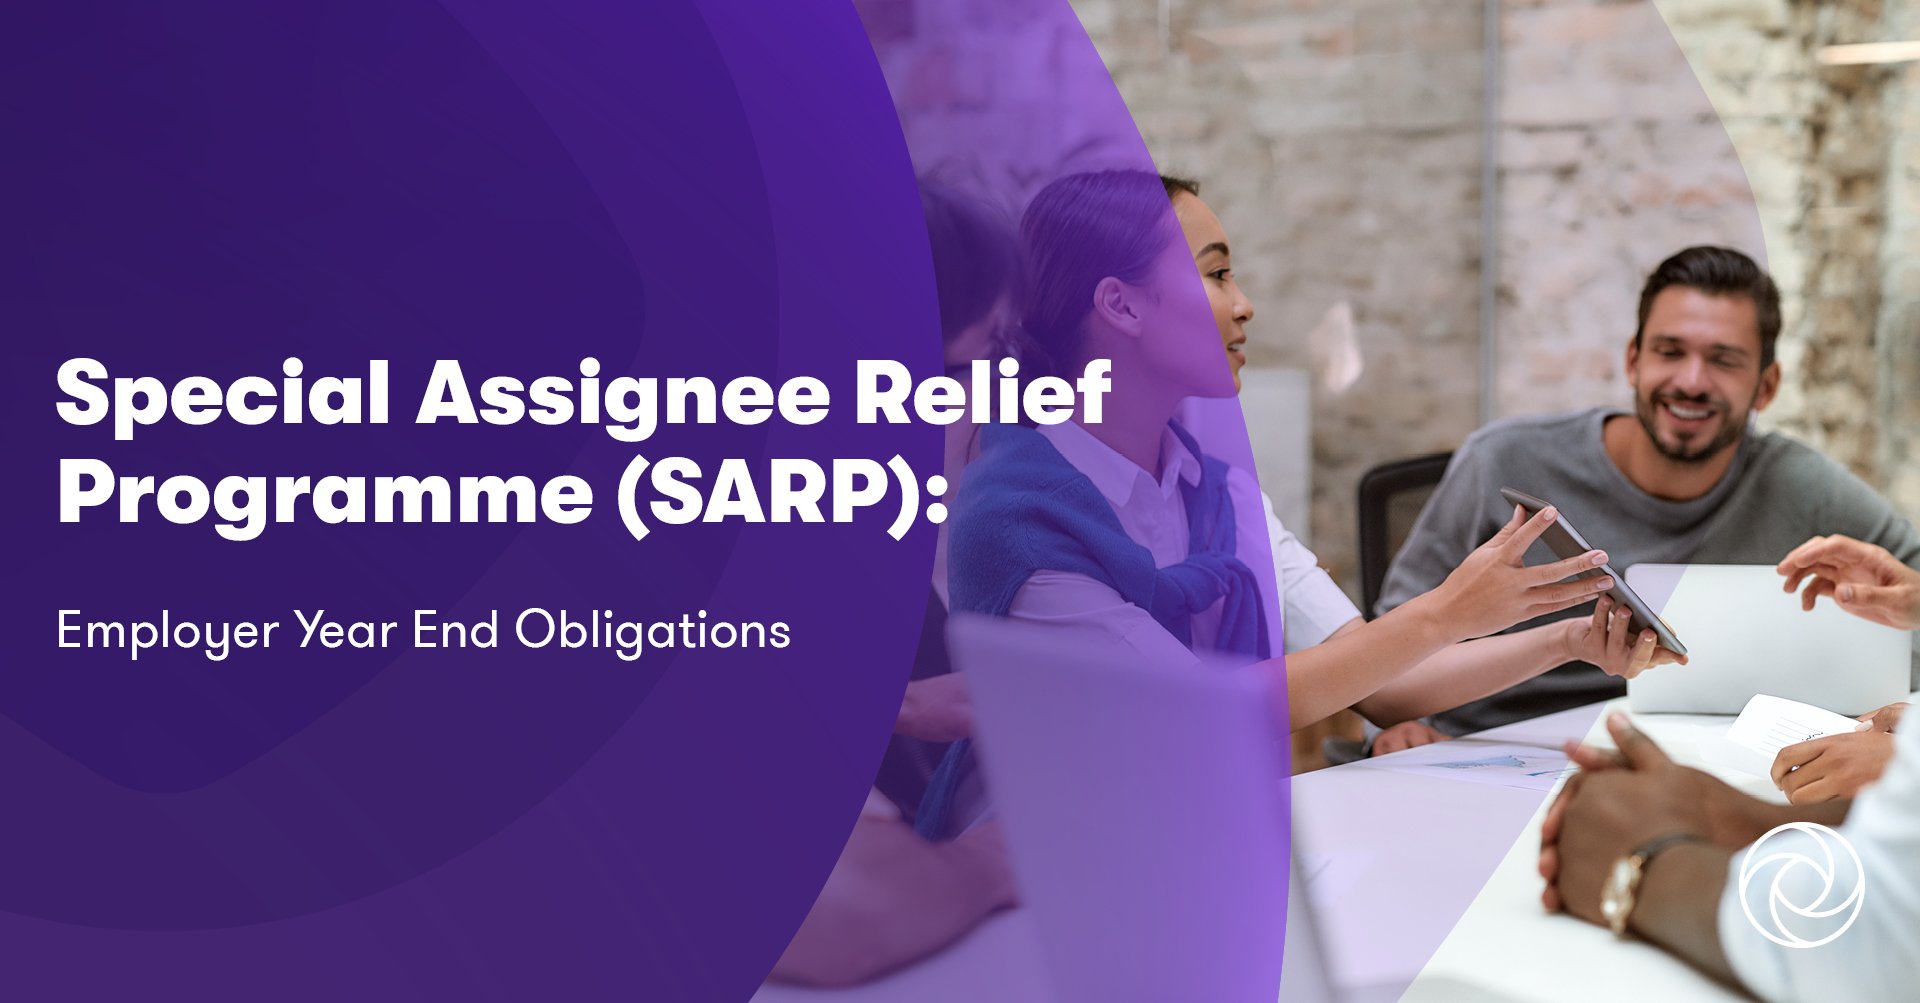 Special Assignee Relief Programme (SARP) Employer Year End Obligations